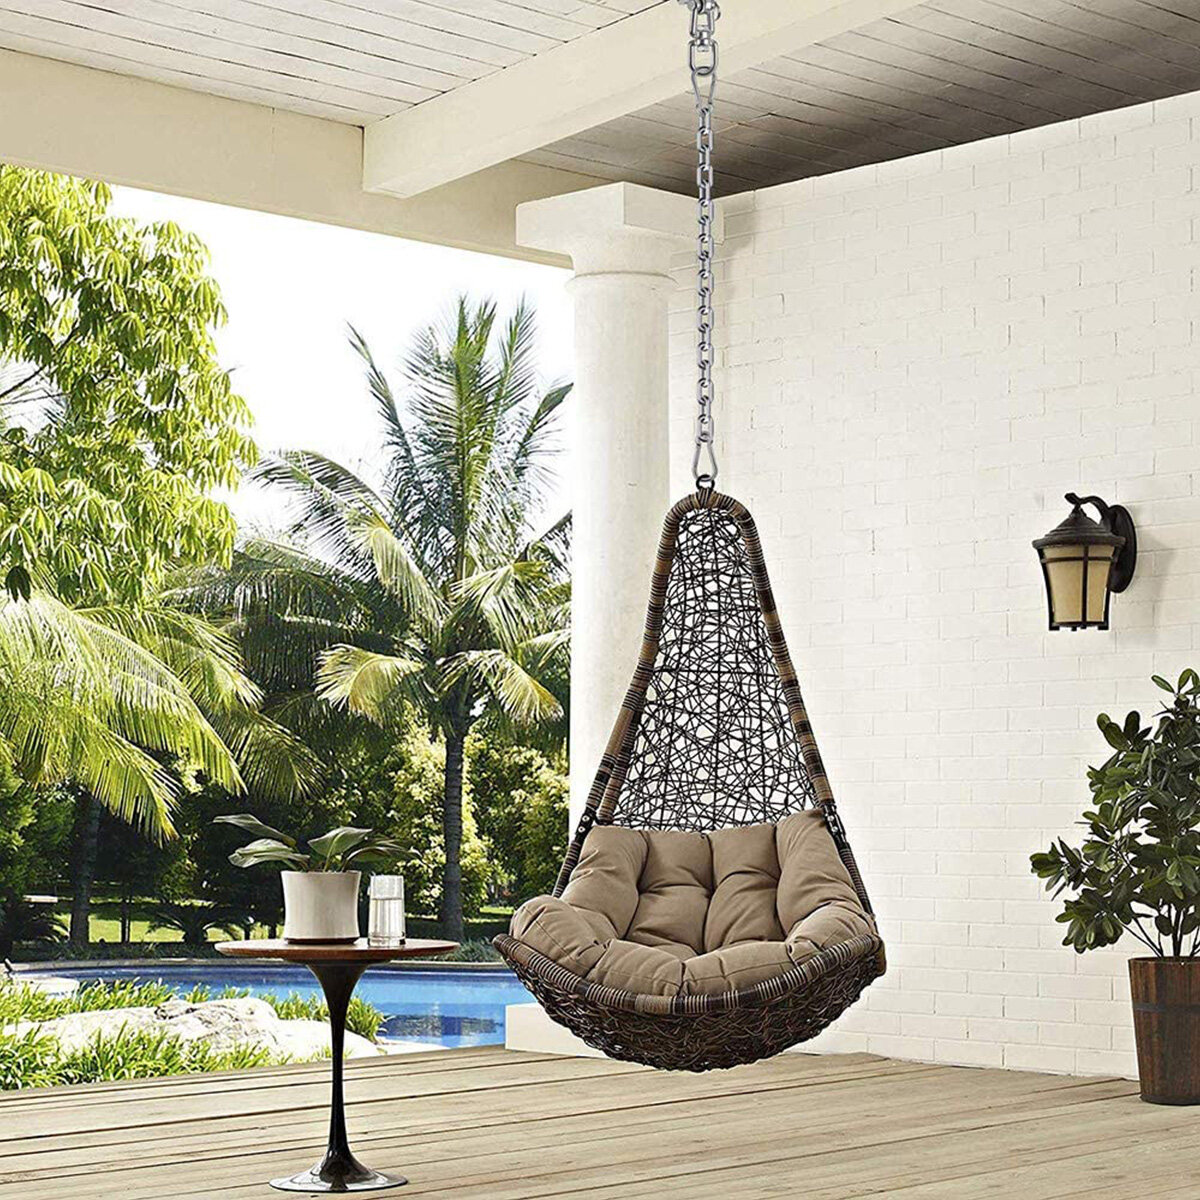 Enhance Outdoor Spaces with Commercial-Grade Garden Swing Hooks